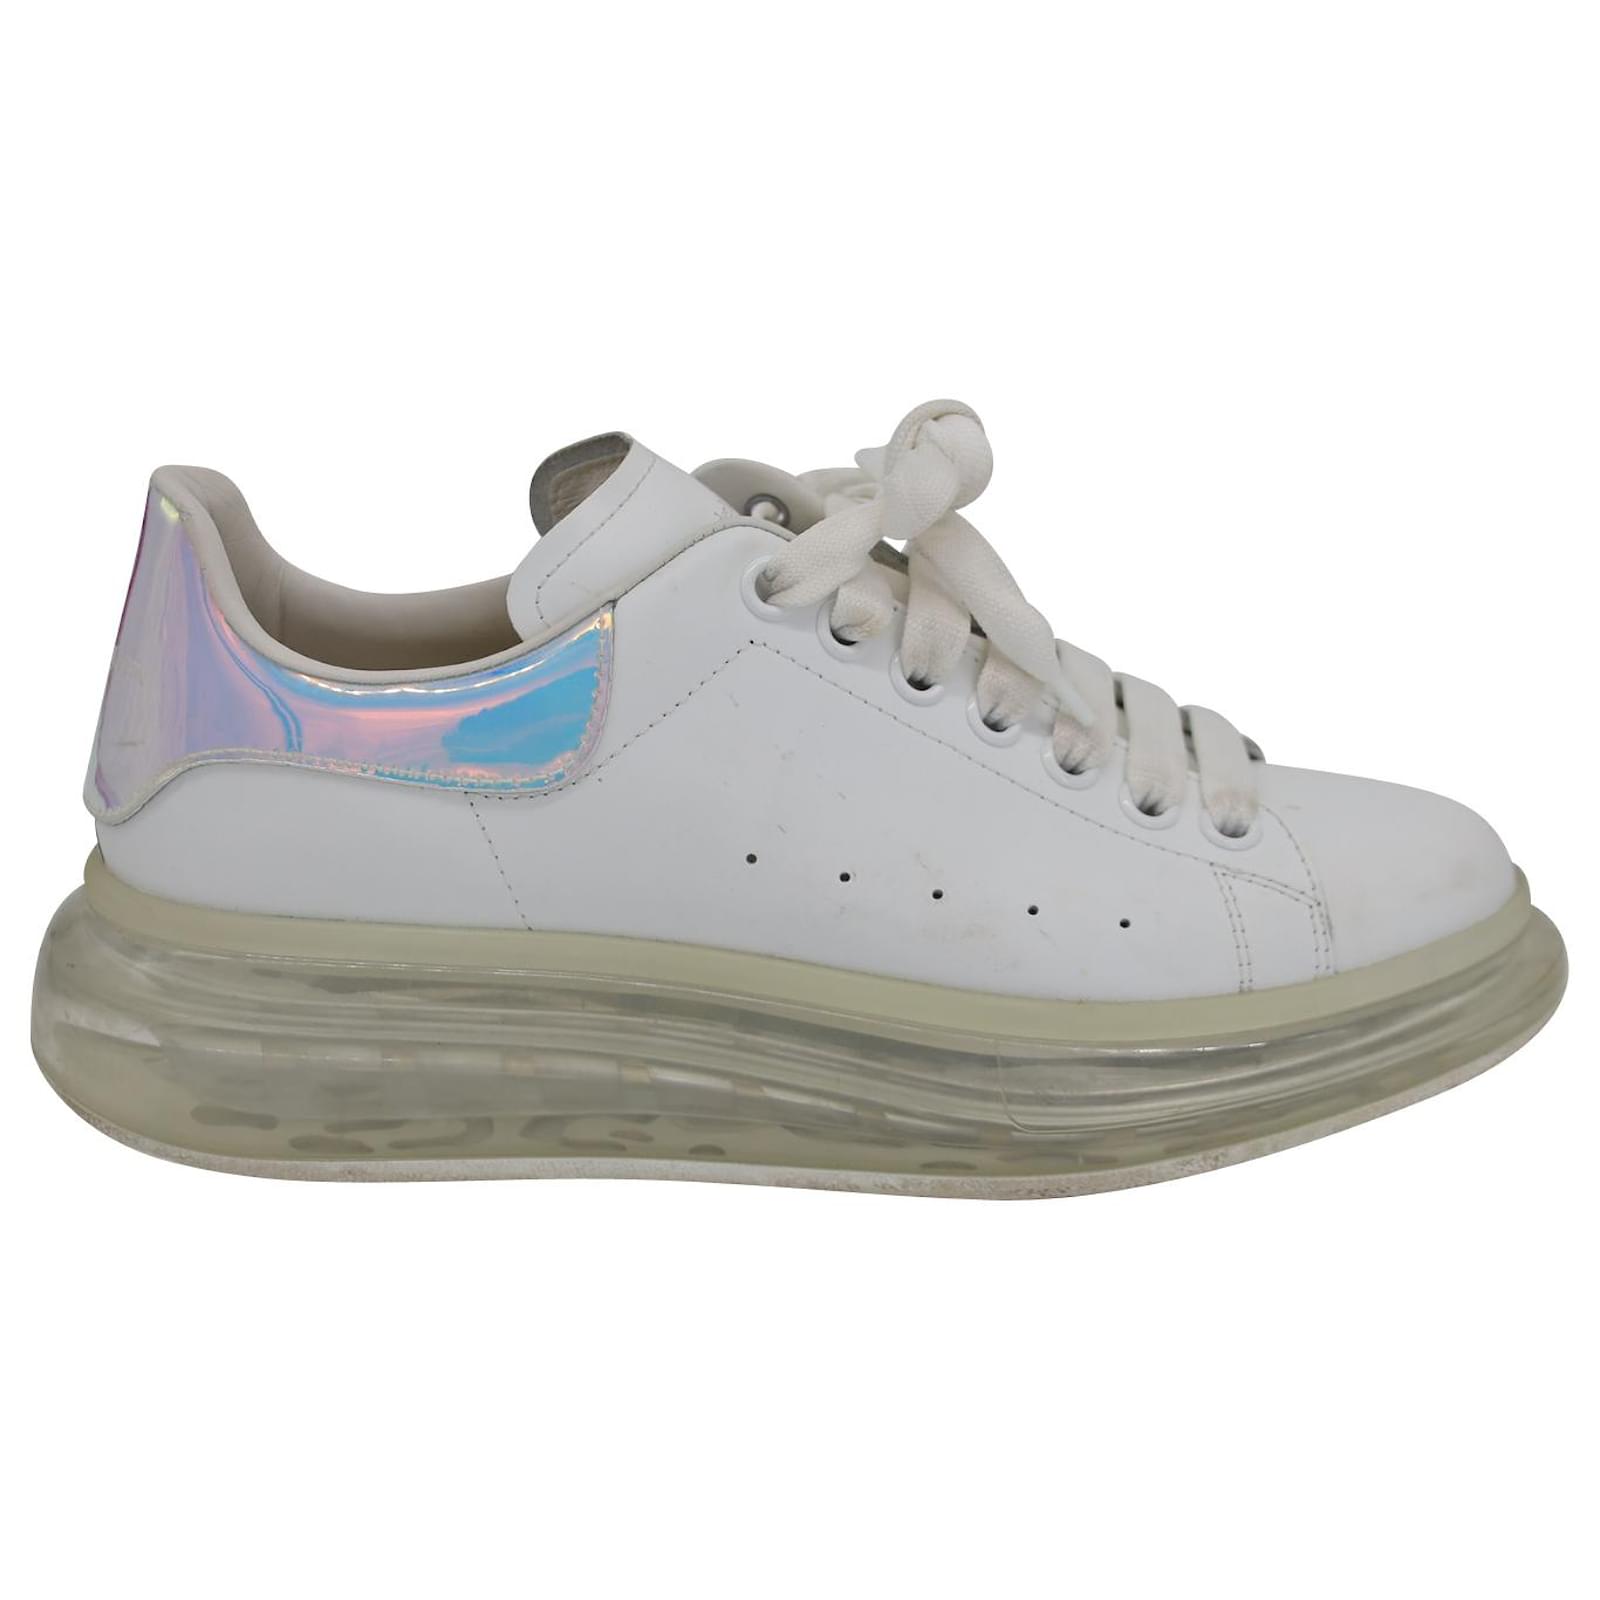 alexander mcqueen larry clear sole iridescent oversized sneakers in white calfskin leather tops